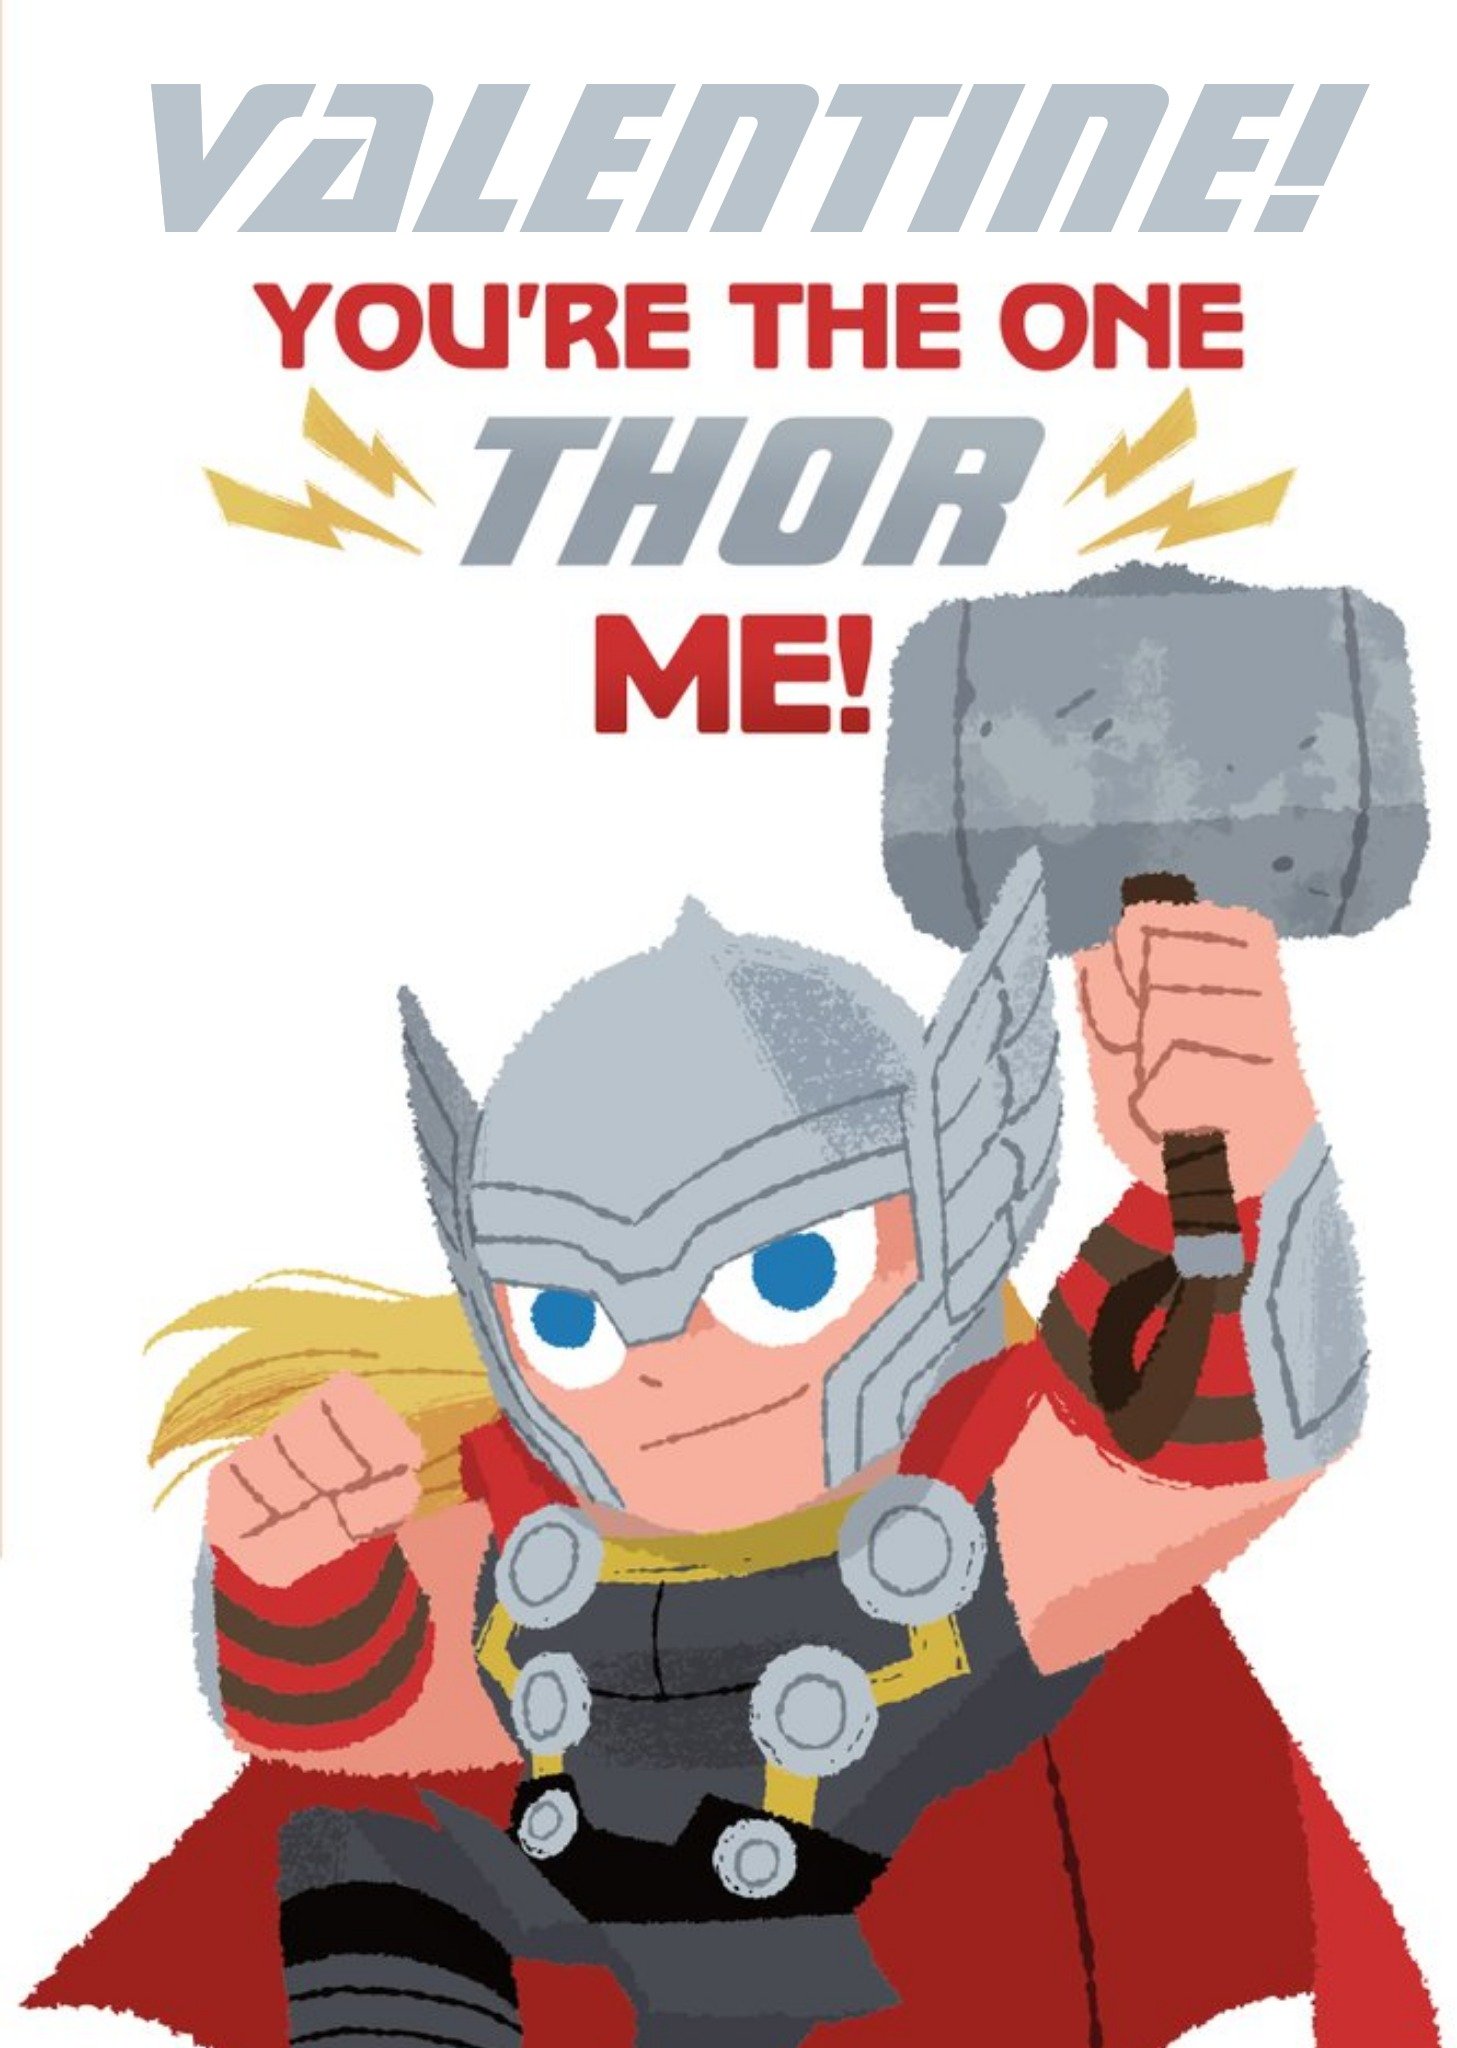 Marvel Comics You're The One Thor Me Valentine's Day Card Ecard